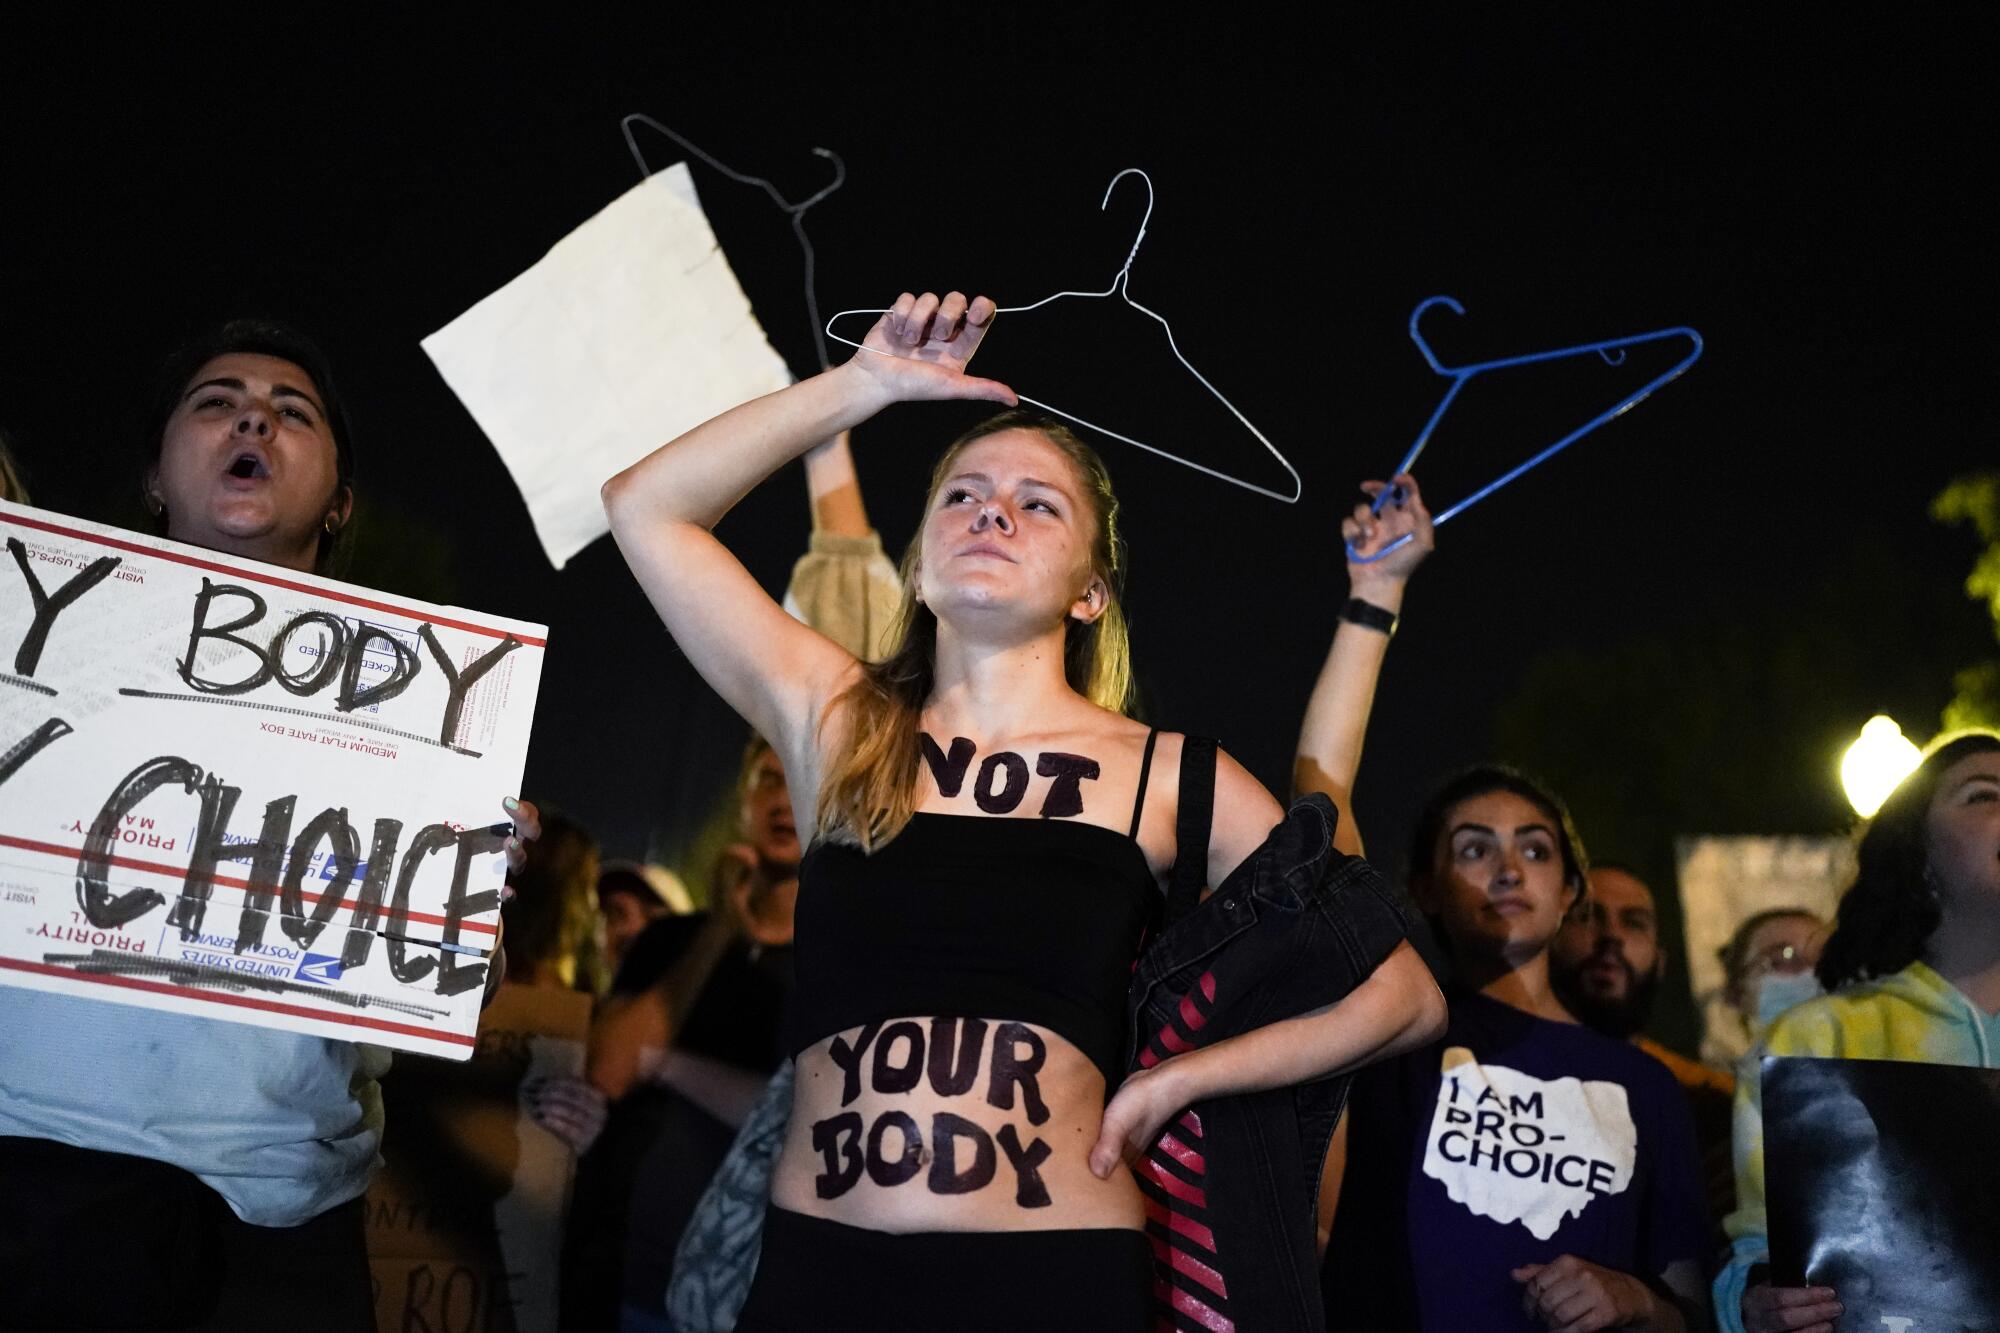 Protesters hold coat hangers, and a woman has the words "Not Your Body" written on her torso.